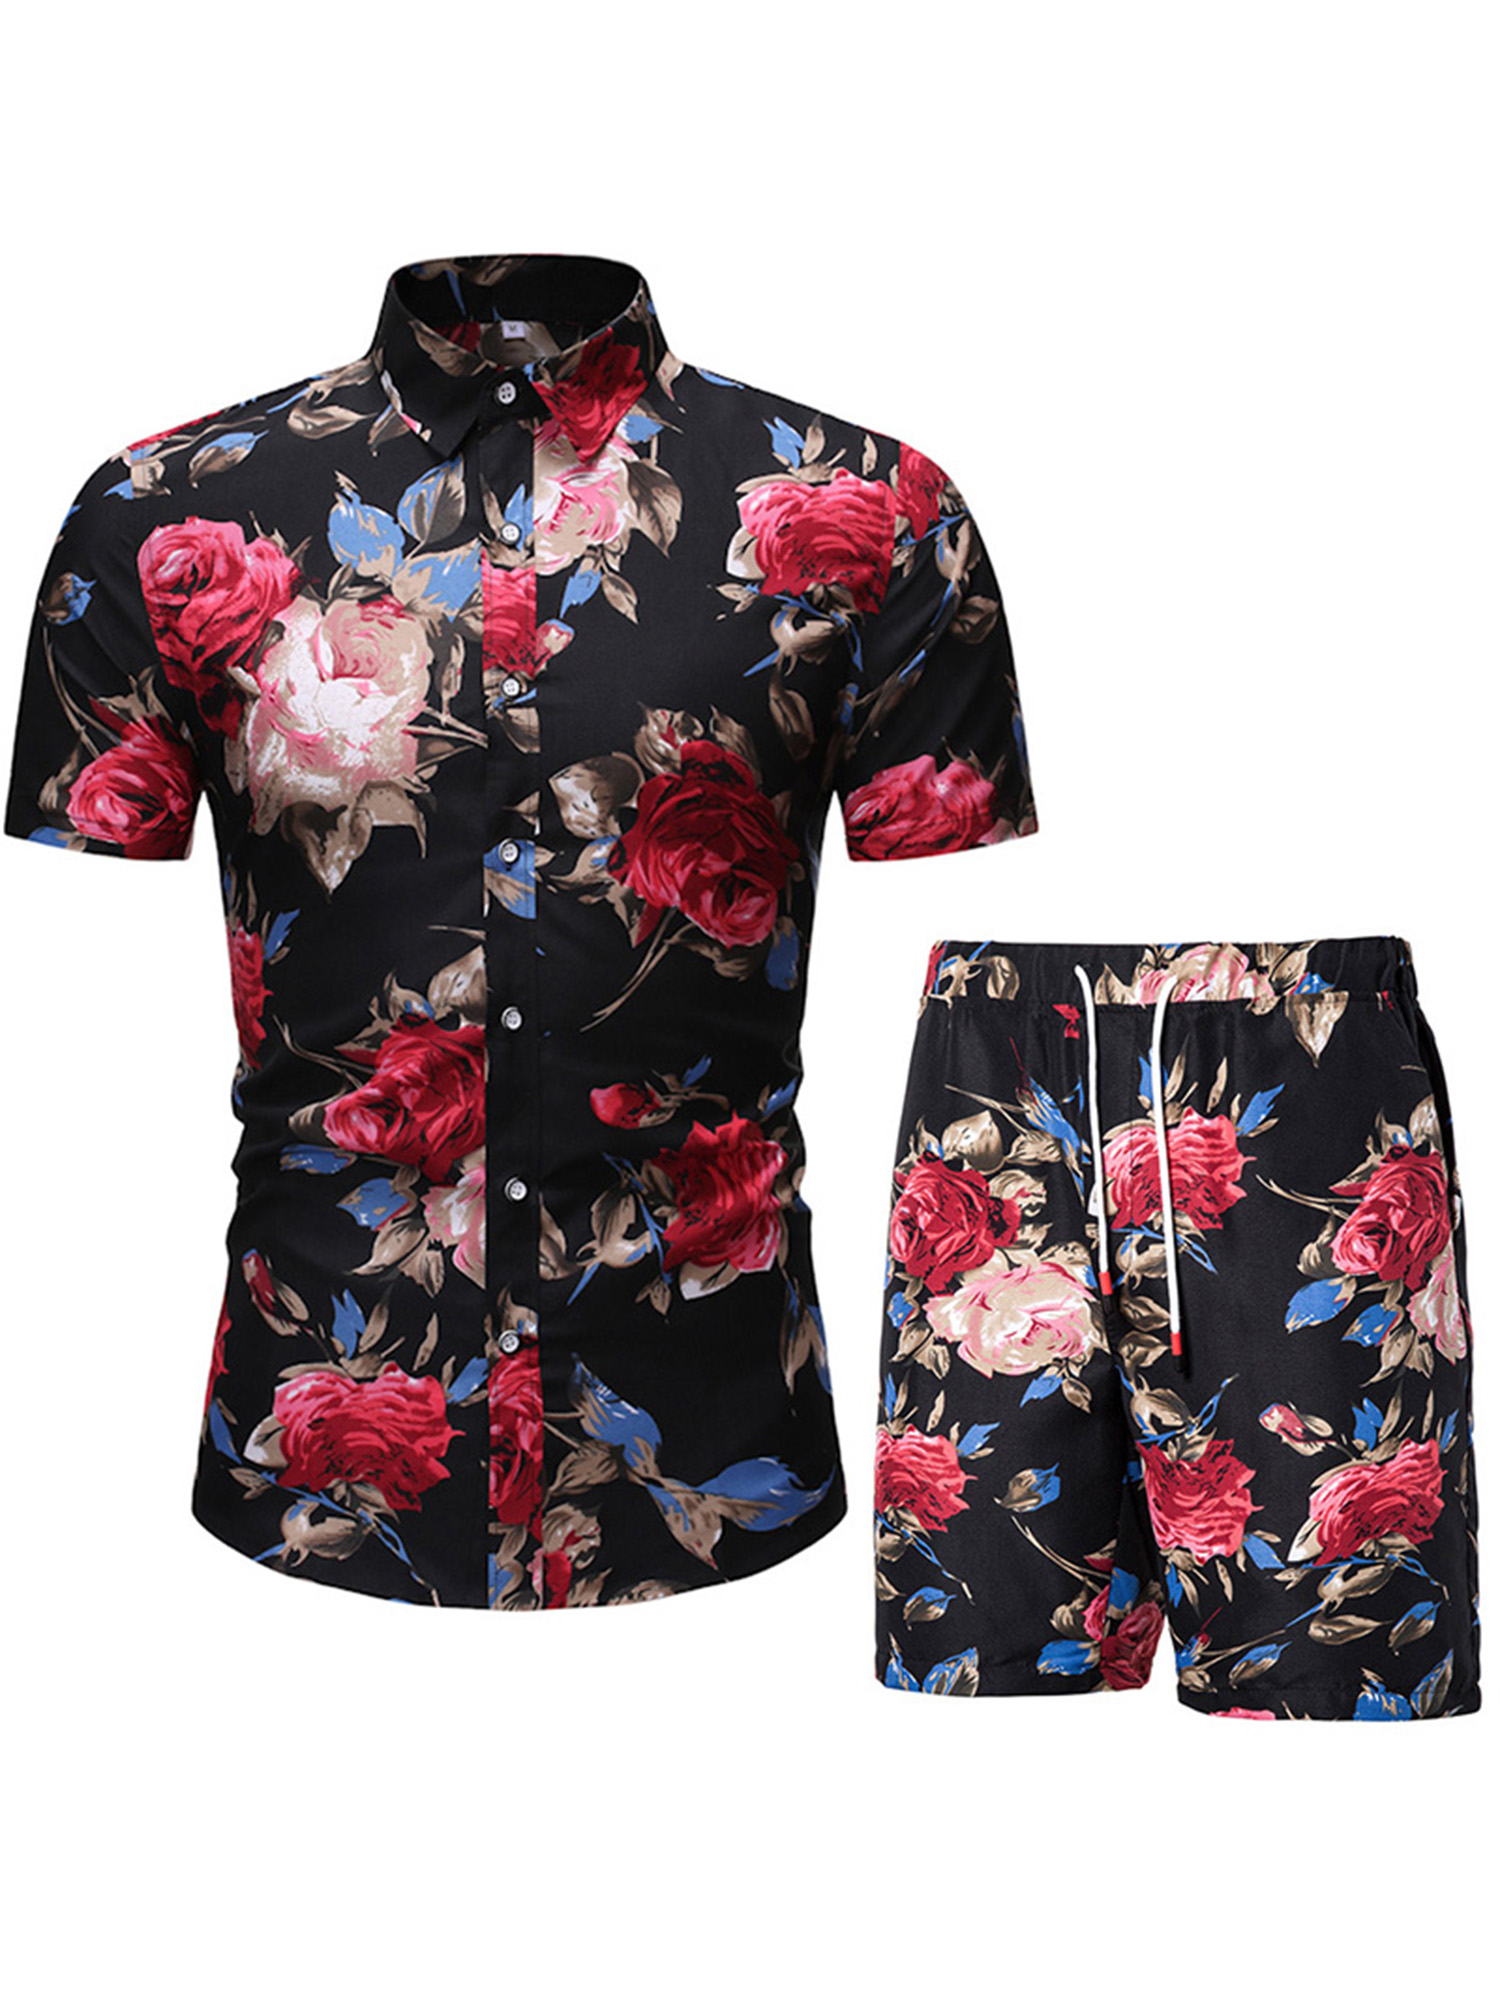 Litteking Men's 2 Piece Tracksuits Floral Hawaiian Sweat Suit Casual Short Sleeve Shirt and Shorts Suit Set Sports Outfit 